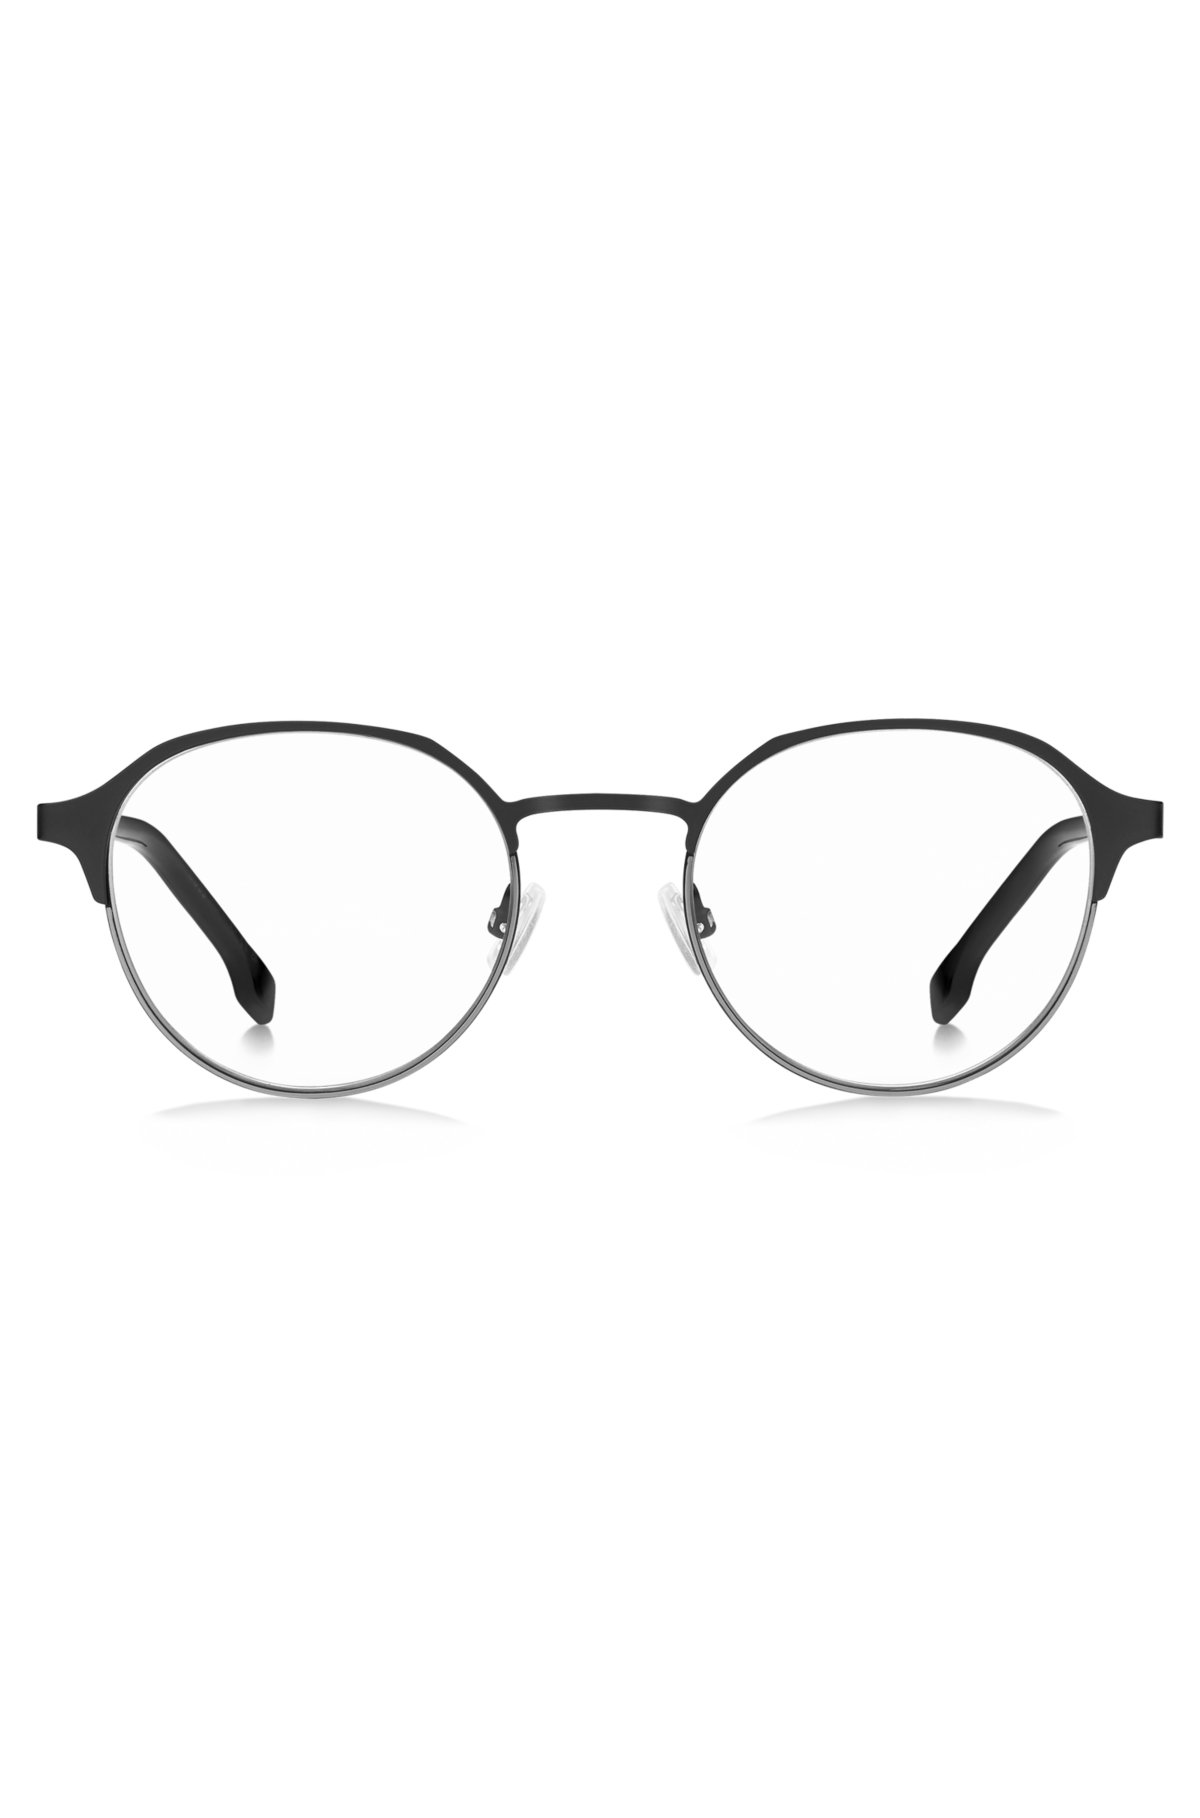 Round optical frames in black steel with striped hinge, Black